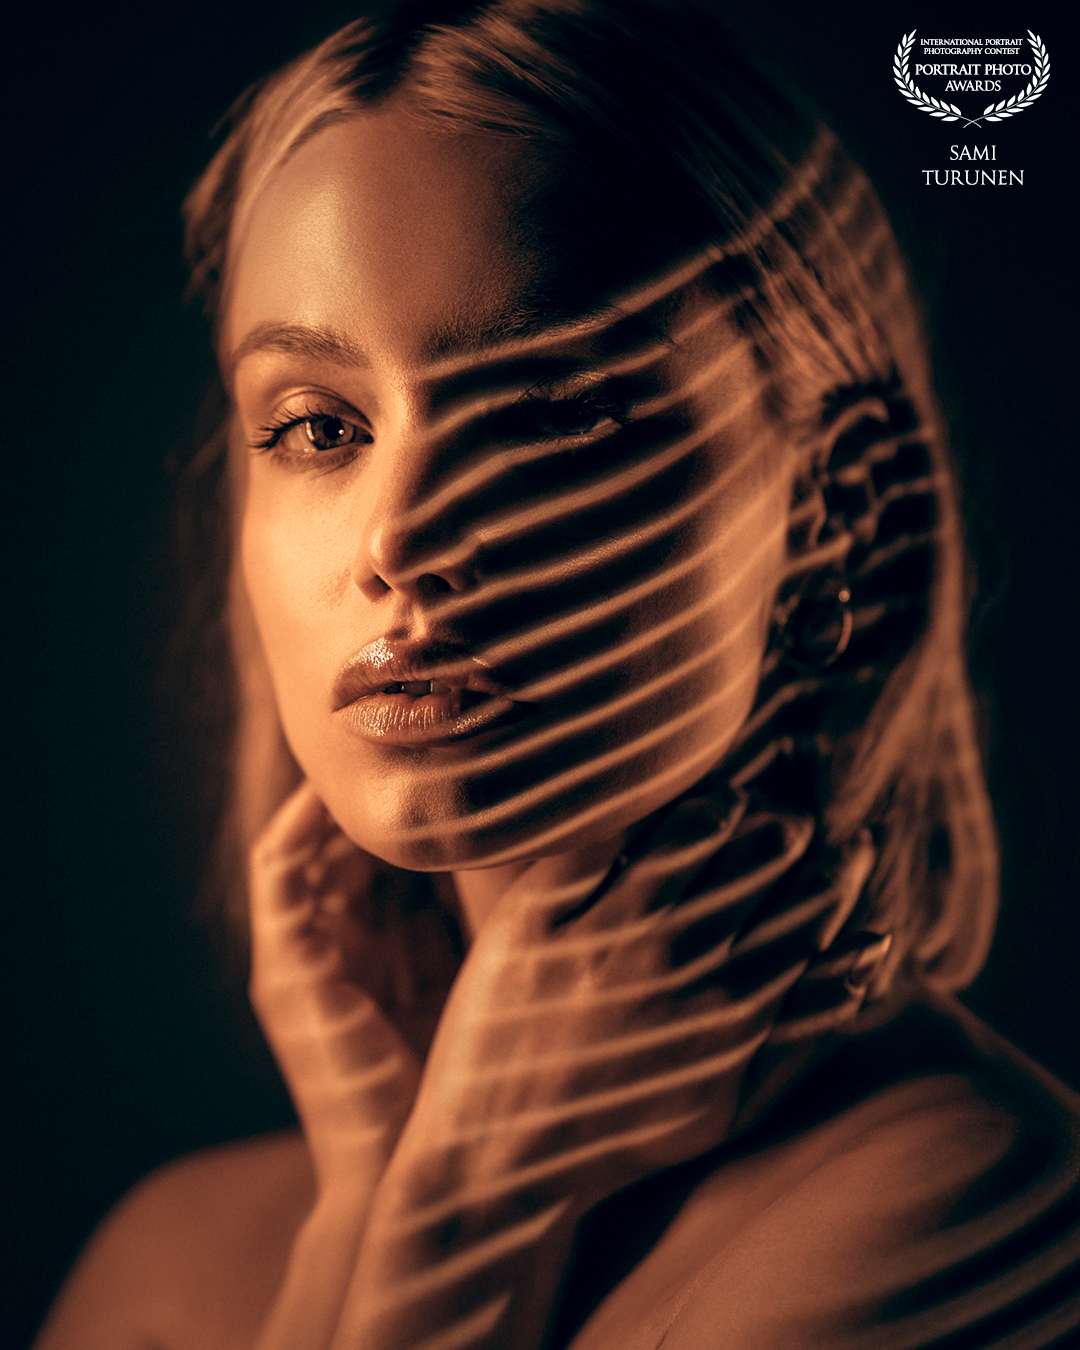 This photo is a combination of led tubes and video projector (home-made-gobo). Stripe gobo gives nice shapes and flows through model's (elegant Veera Kankare) natural curves. Expression and tones are perfect for this kind of moody photo.